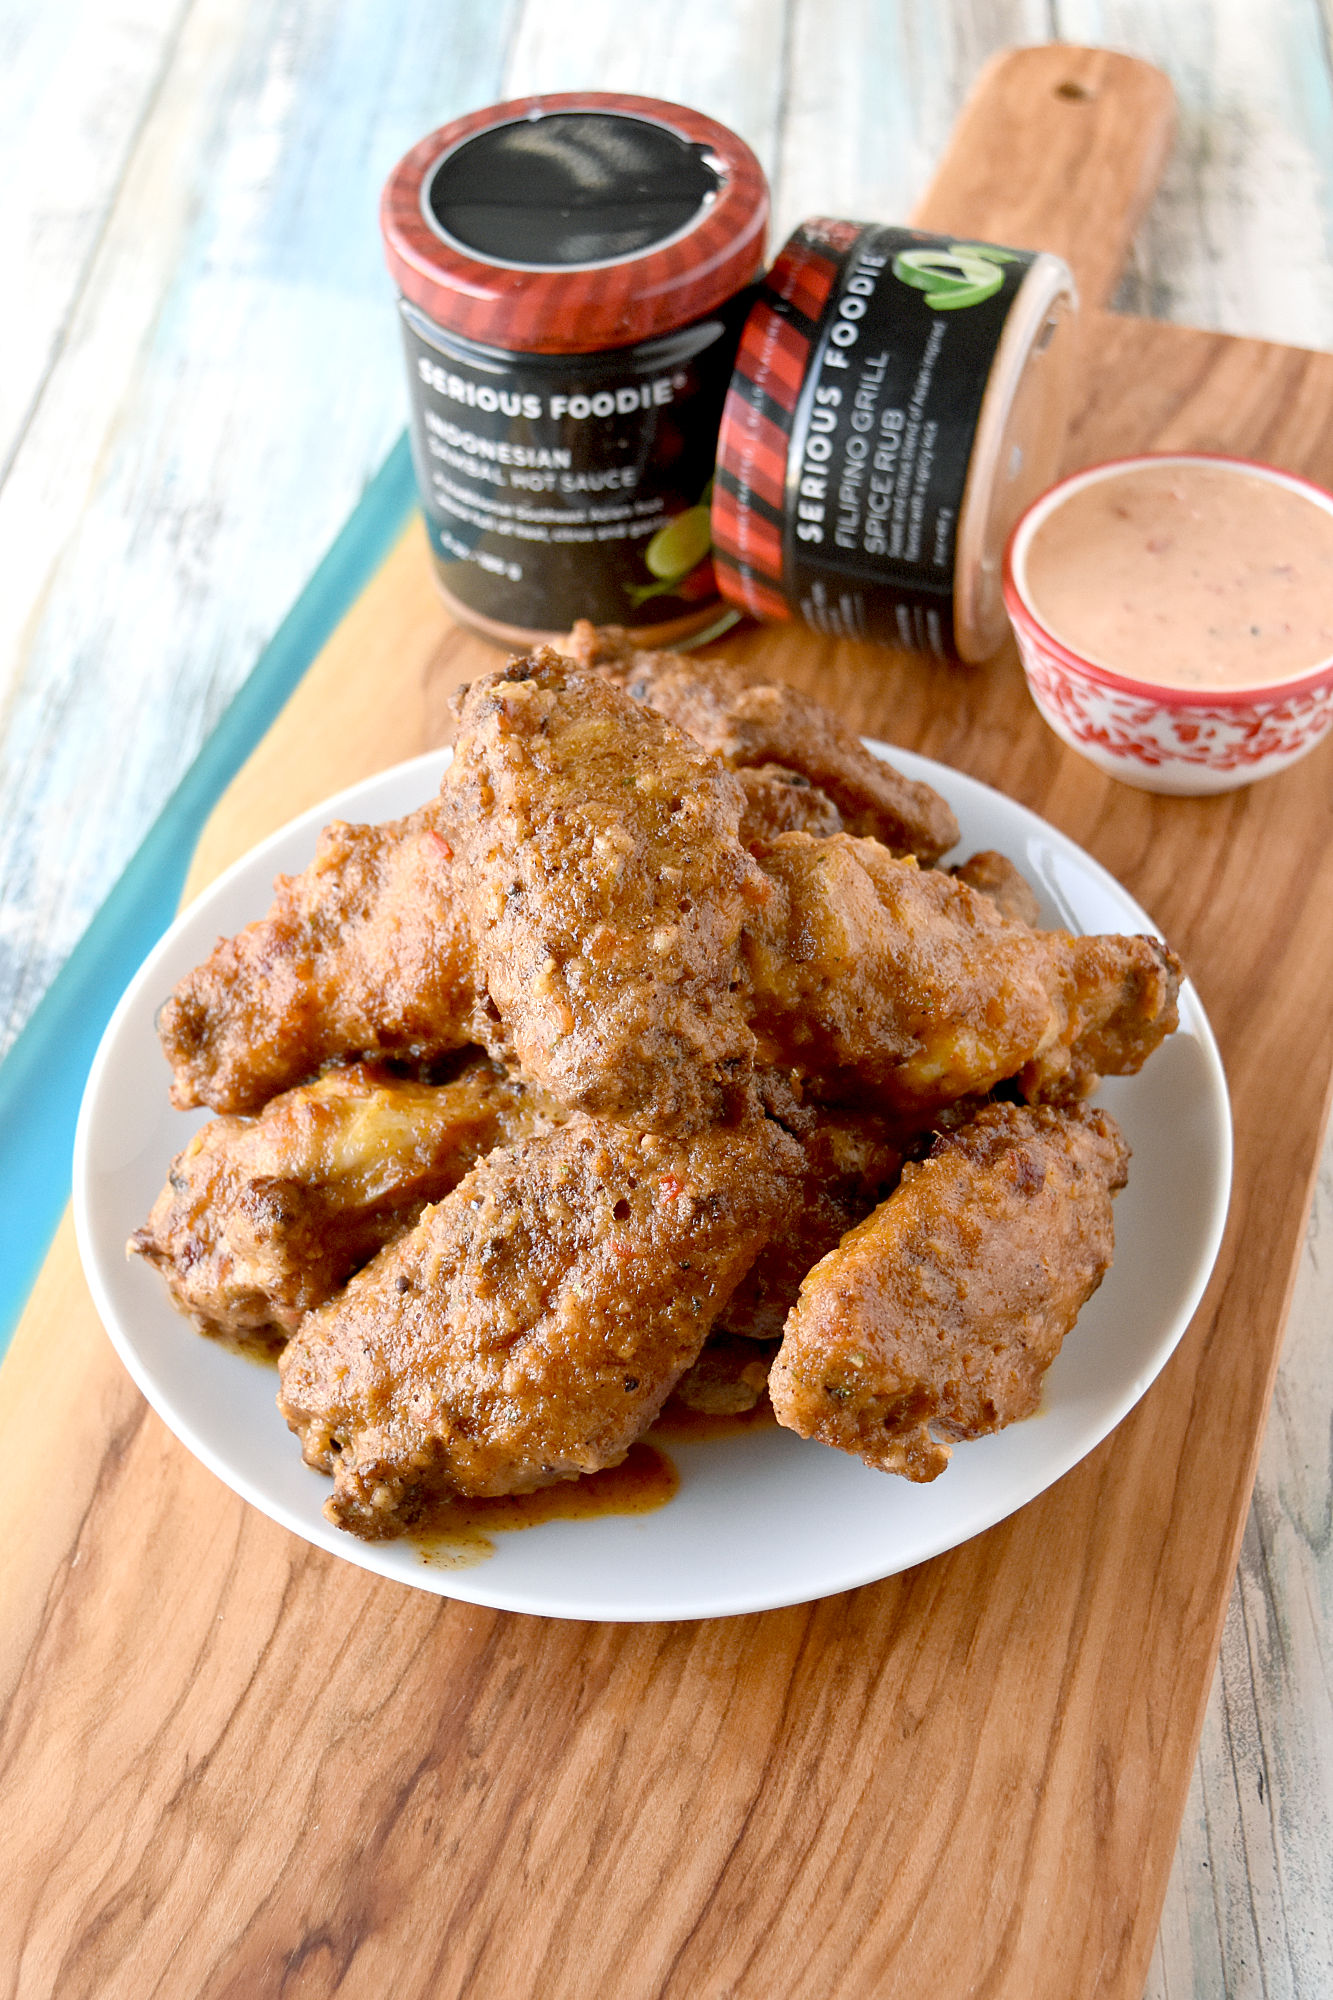 Sambal Crispy Air Fryer Wings are coated in Filipino grill spice and a secret ingredient before air frying. After cooking, they are tossed in a sambal butter sauce giving them a spicy kick. #SeriousFoodieRecipeChallenge, #SeriousFoodie, #BitesAroundTheWorld